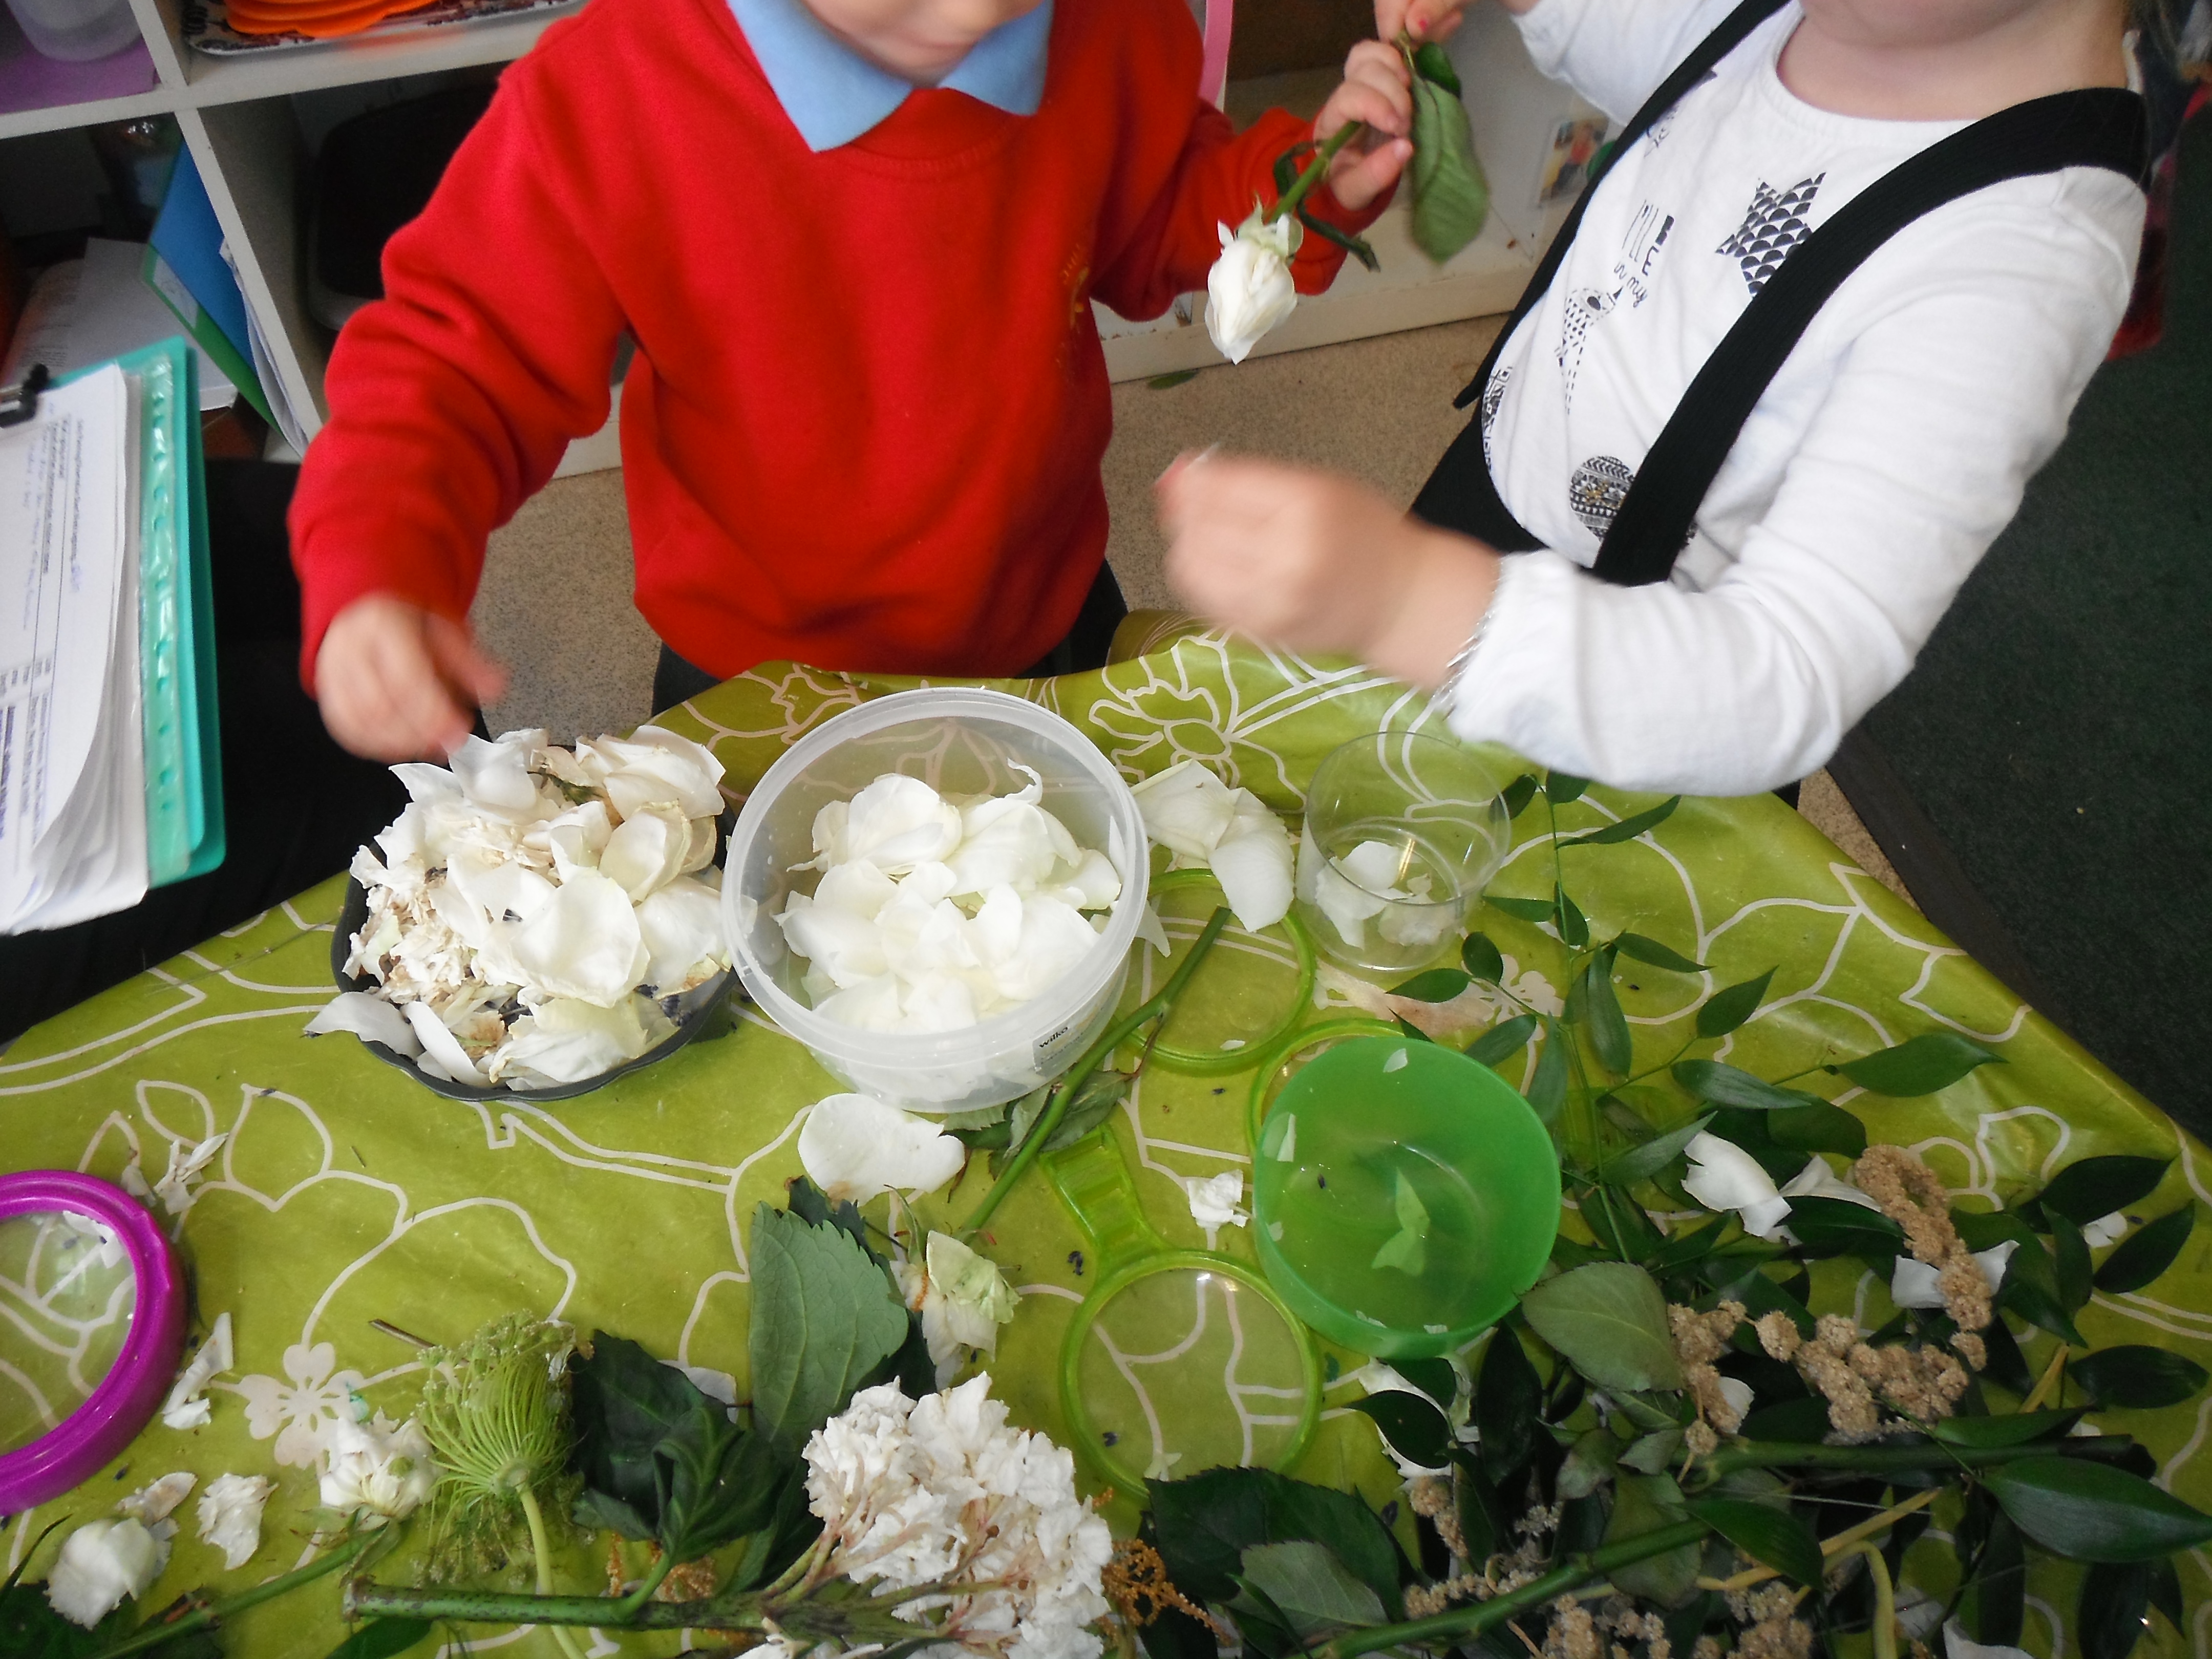 Sensory play with flowers